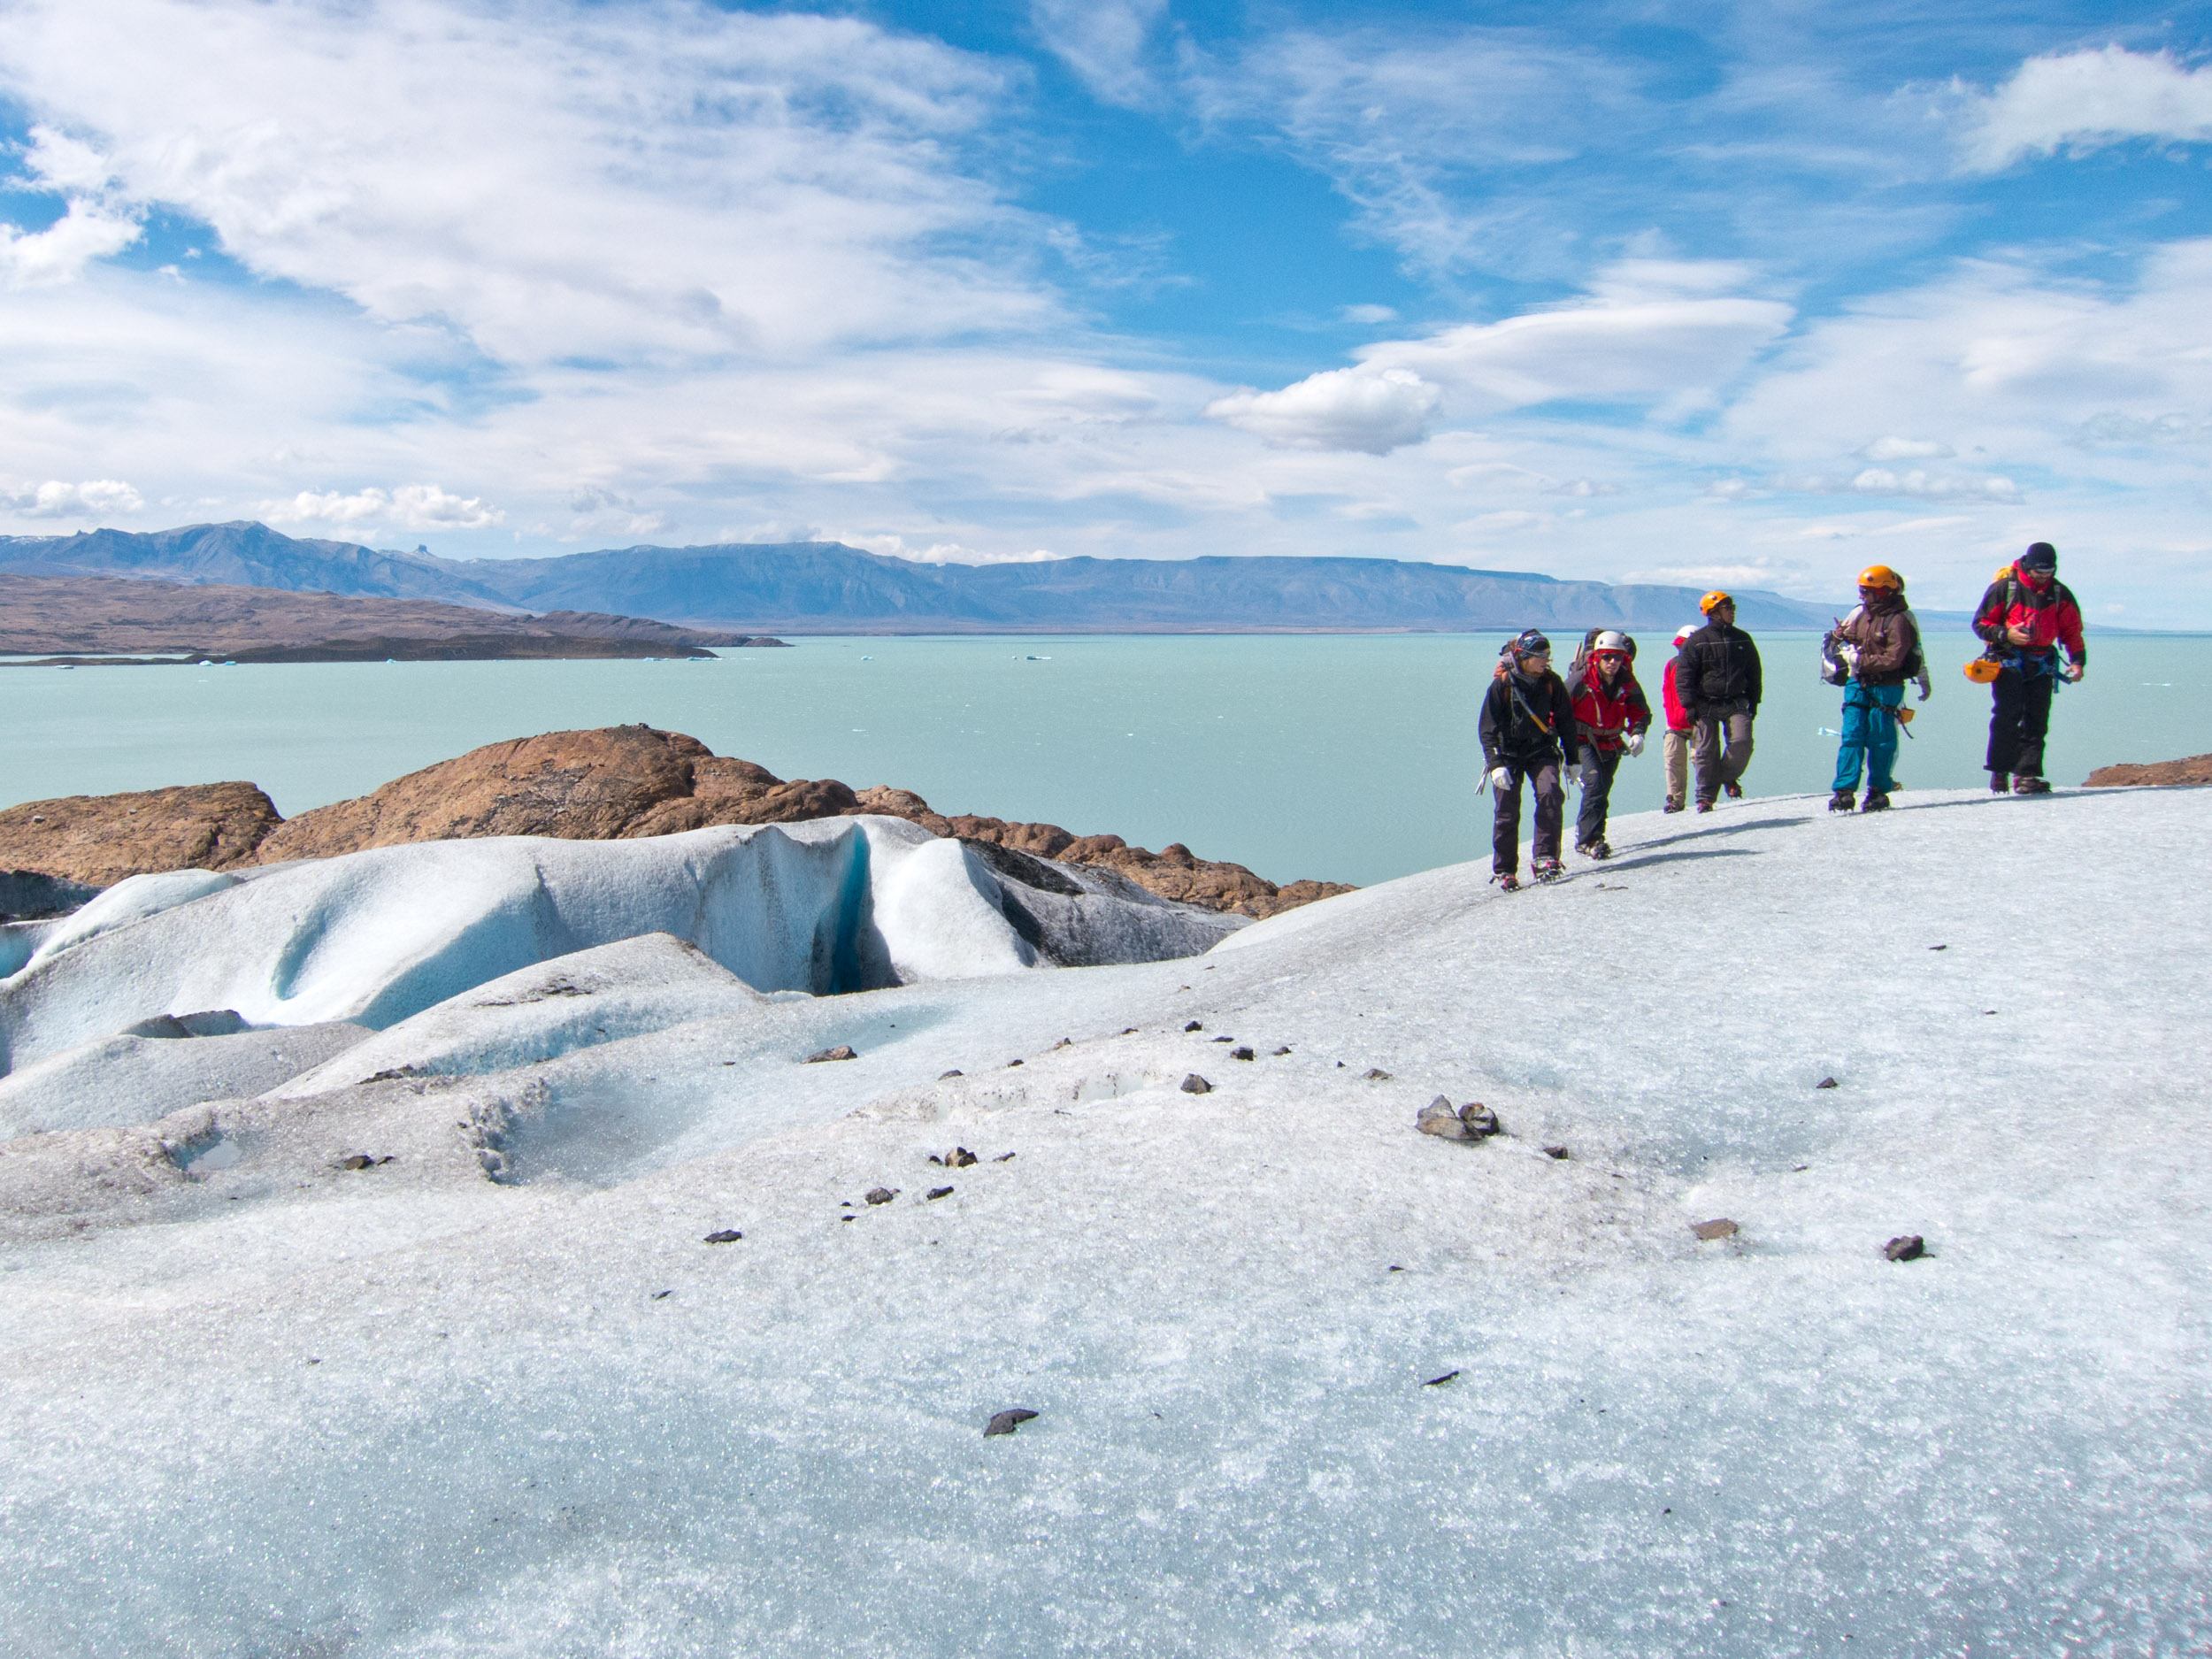 Viedma Glacier was an unexpected stop on my Patagonia itinerary